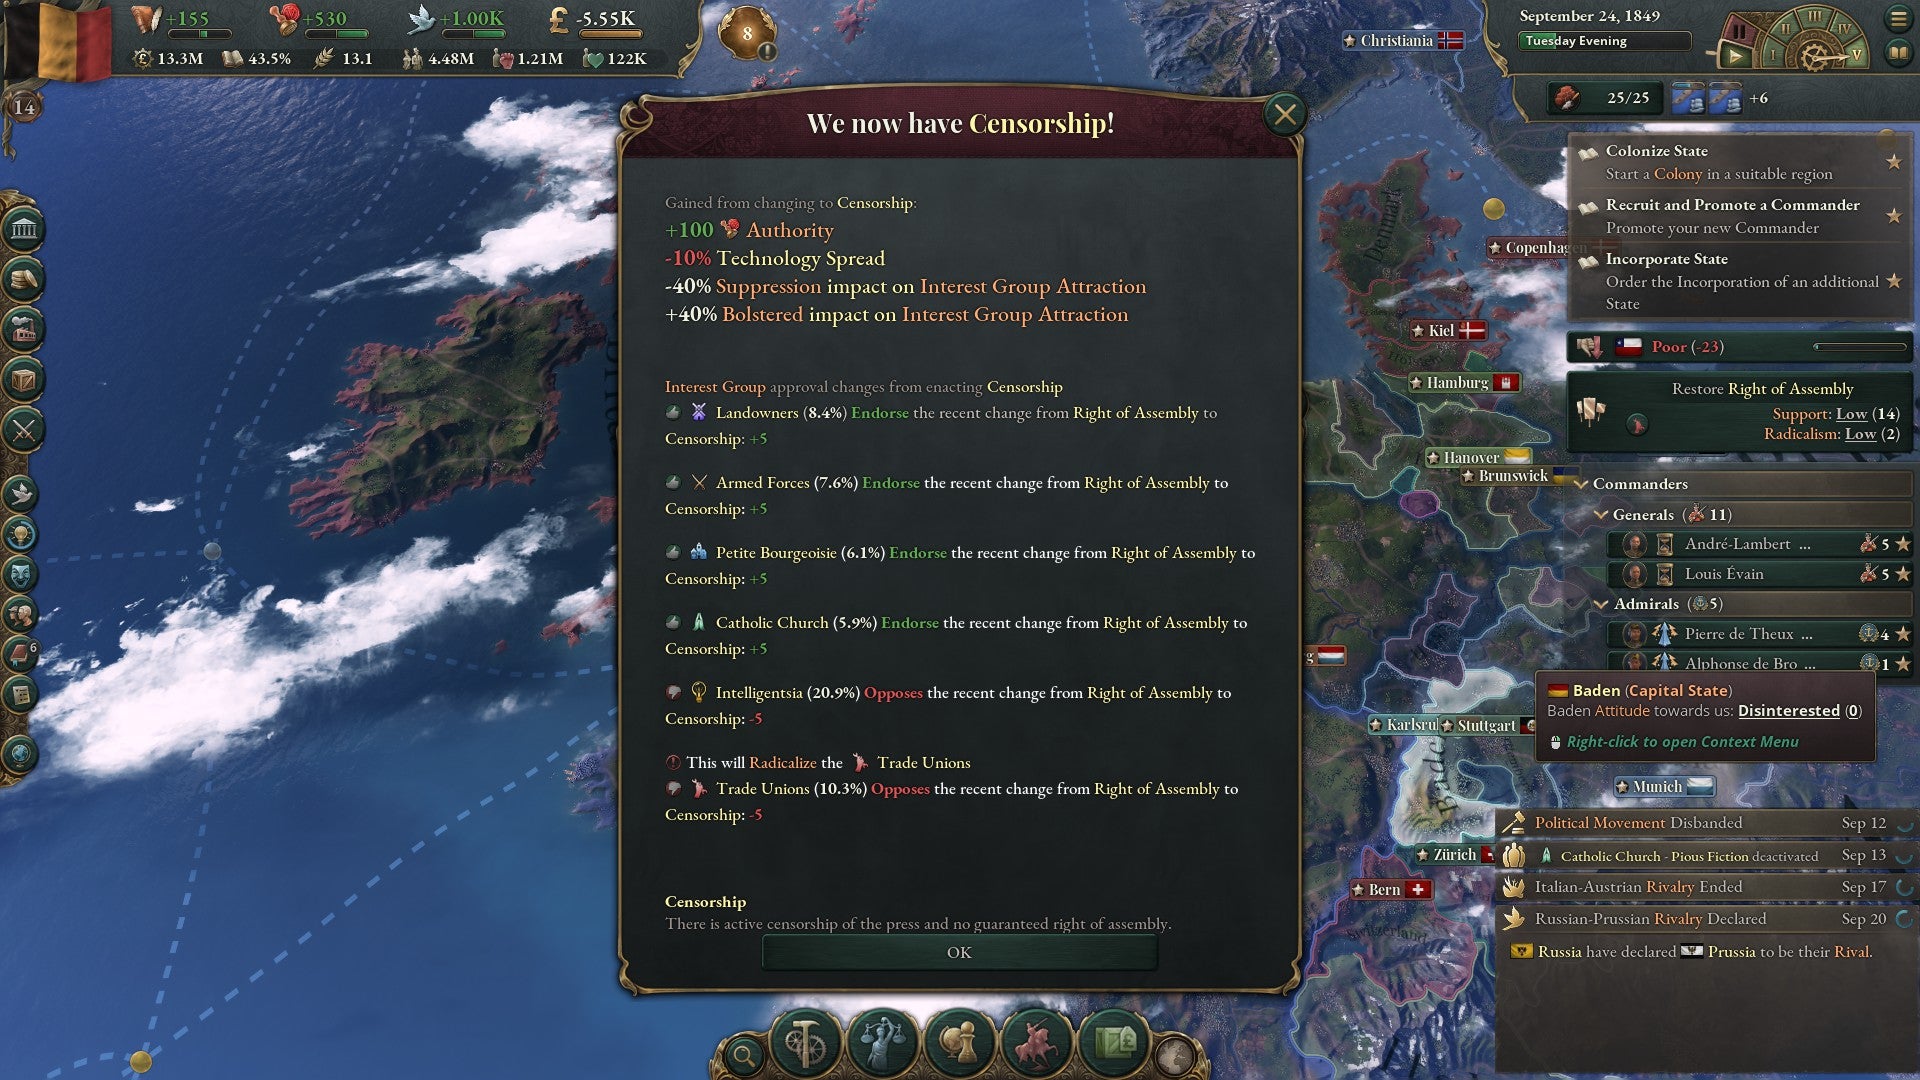 A screenshot from Victoria 3 showing a text box explaining that a censorship law has been passed